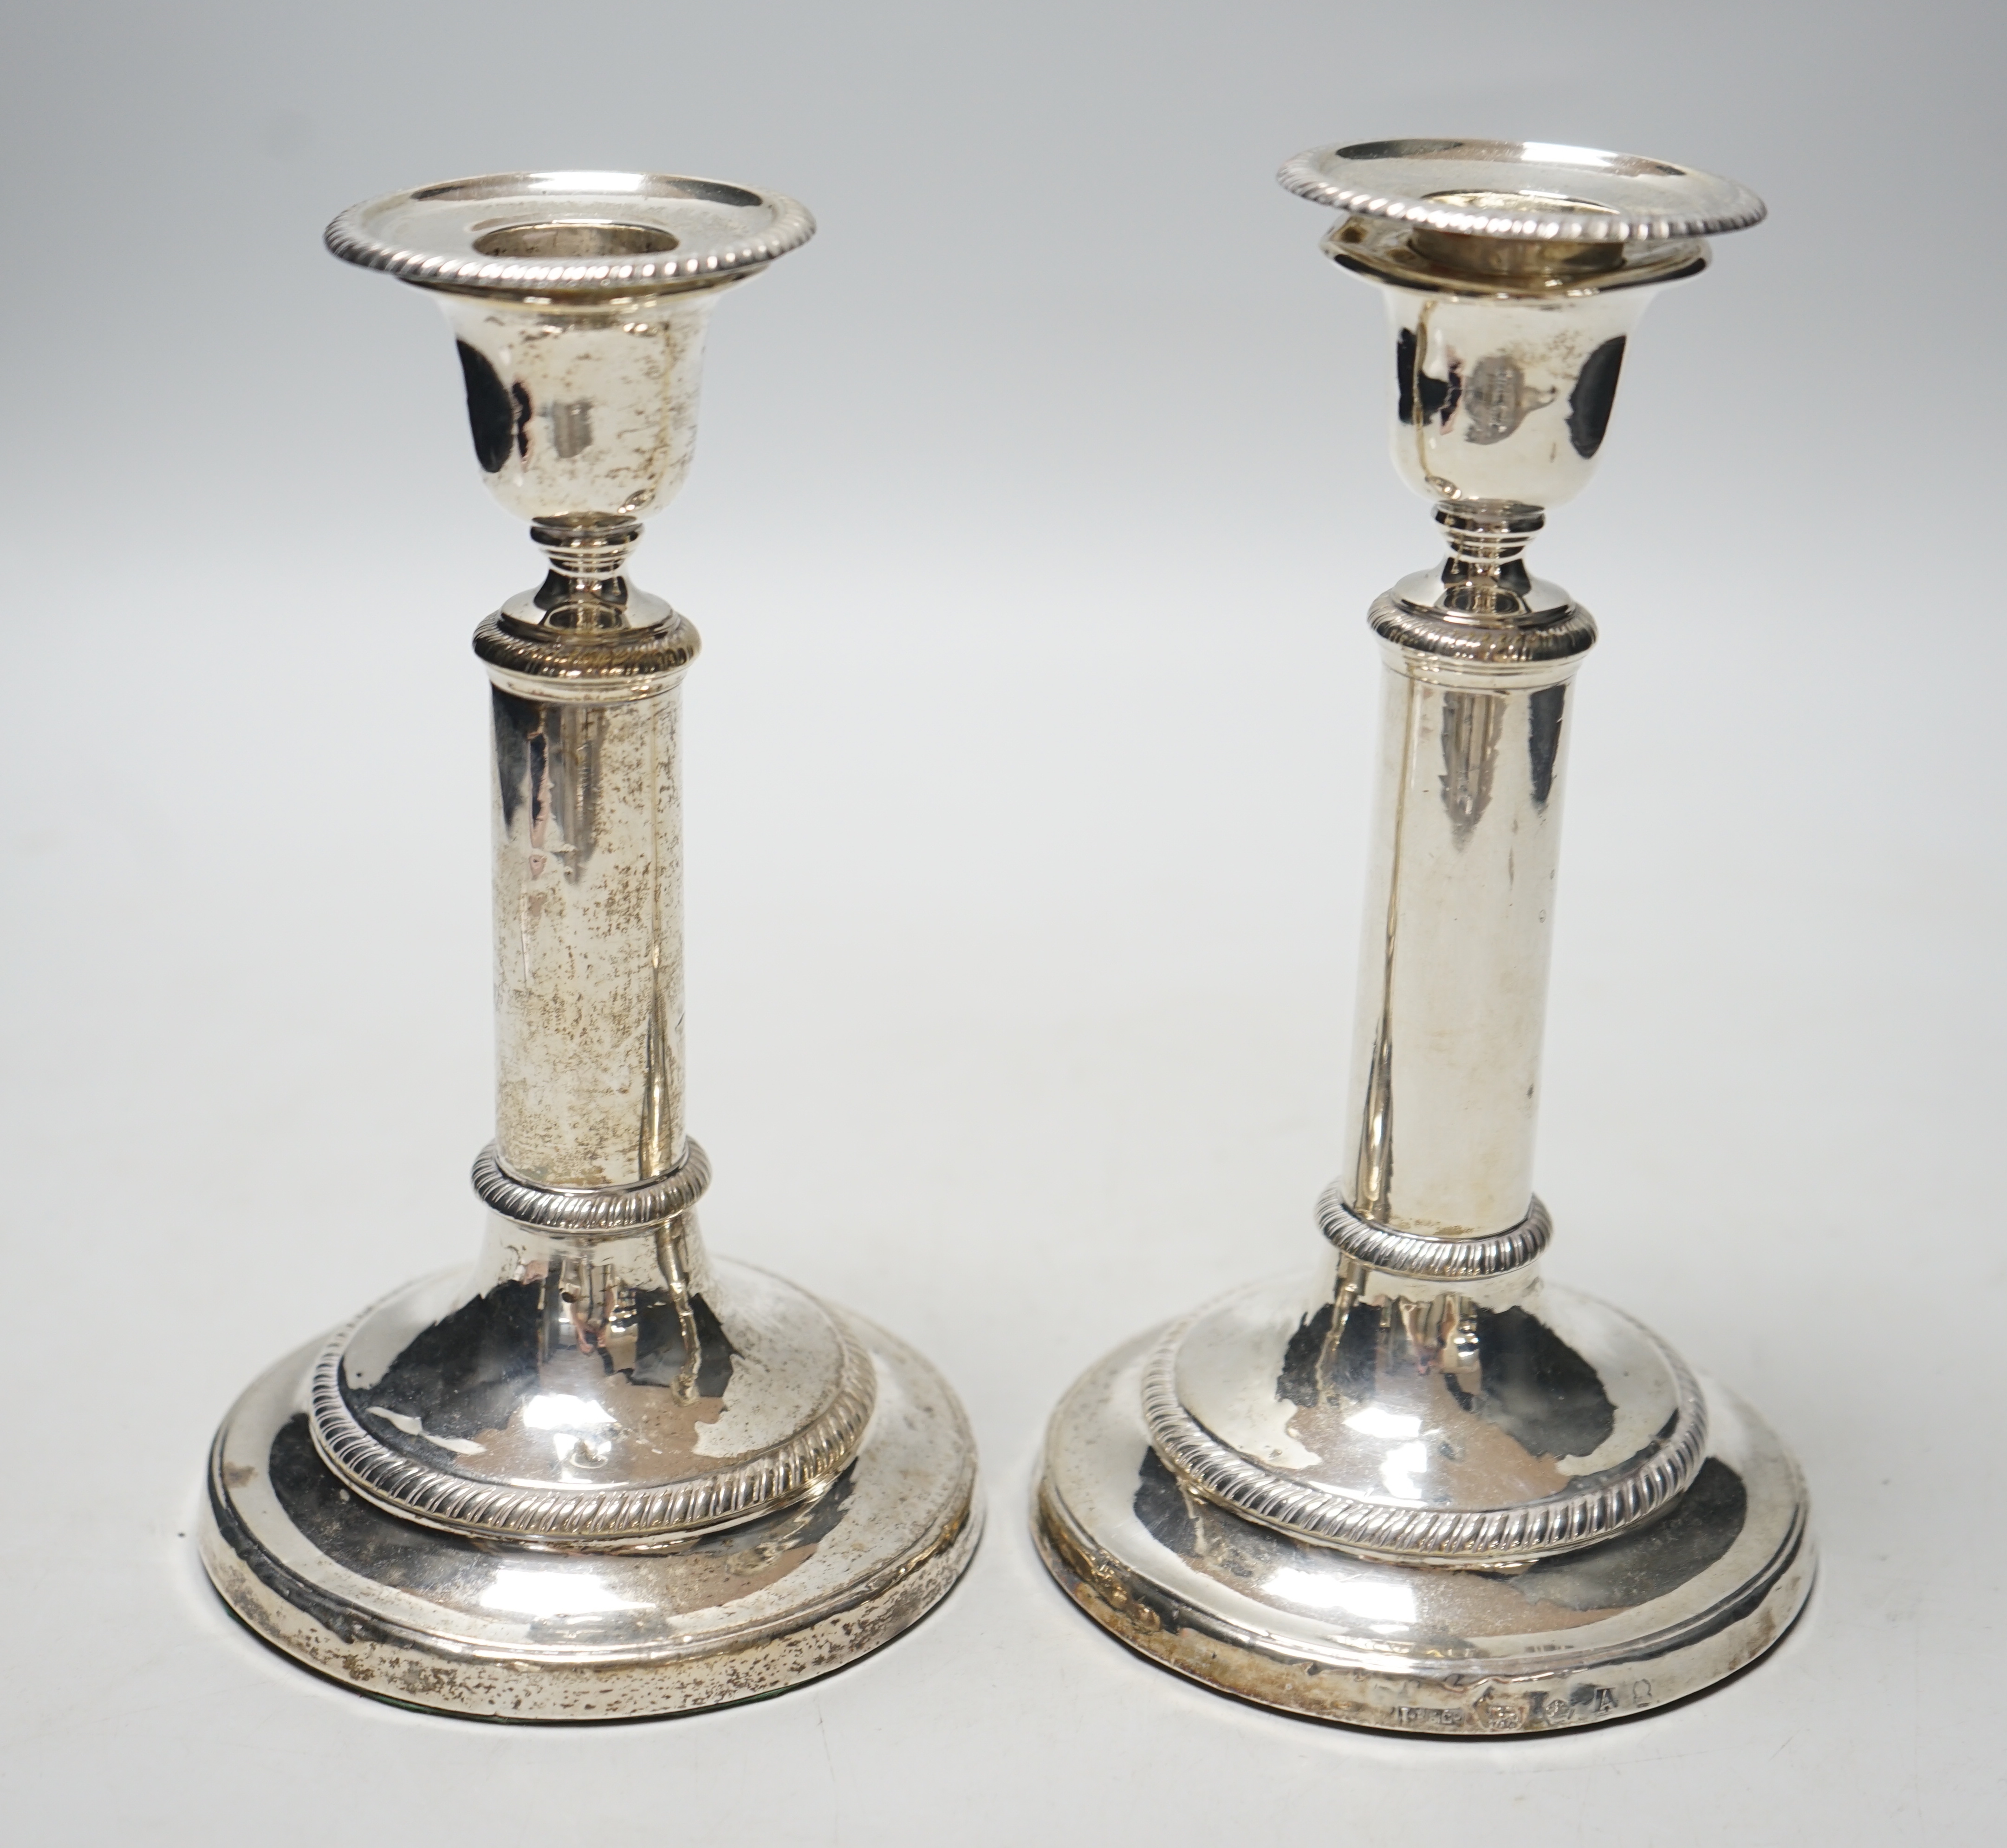 A pair of George III silver candlesticks, with cylindrical stems, John Roberts & Co, Sheffield, 1806, 18.3cm, weighted, (a.f.).                                                                                             